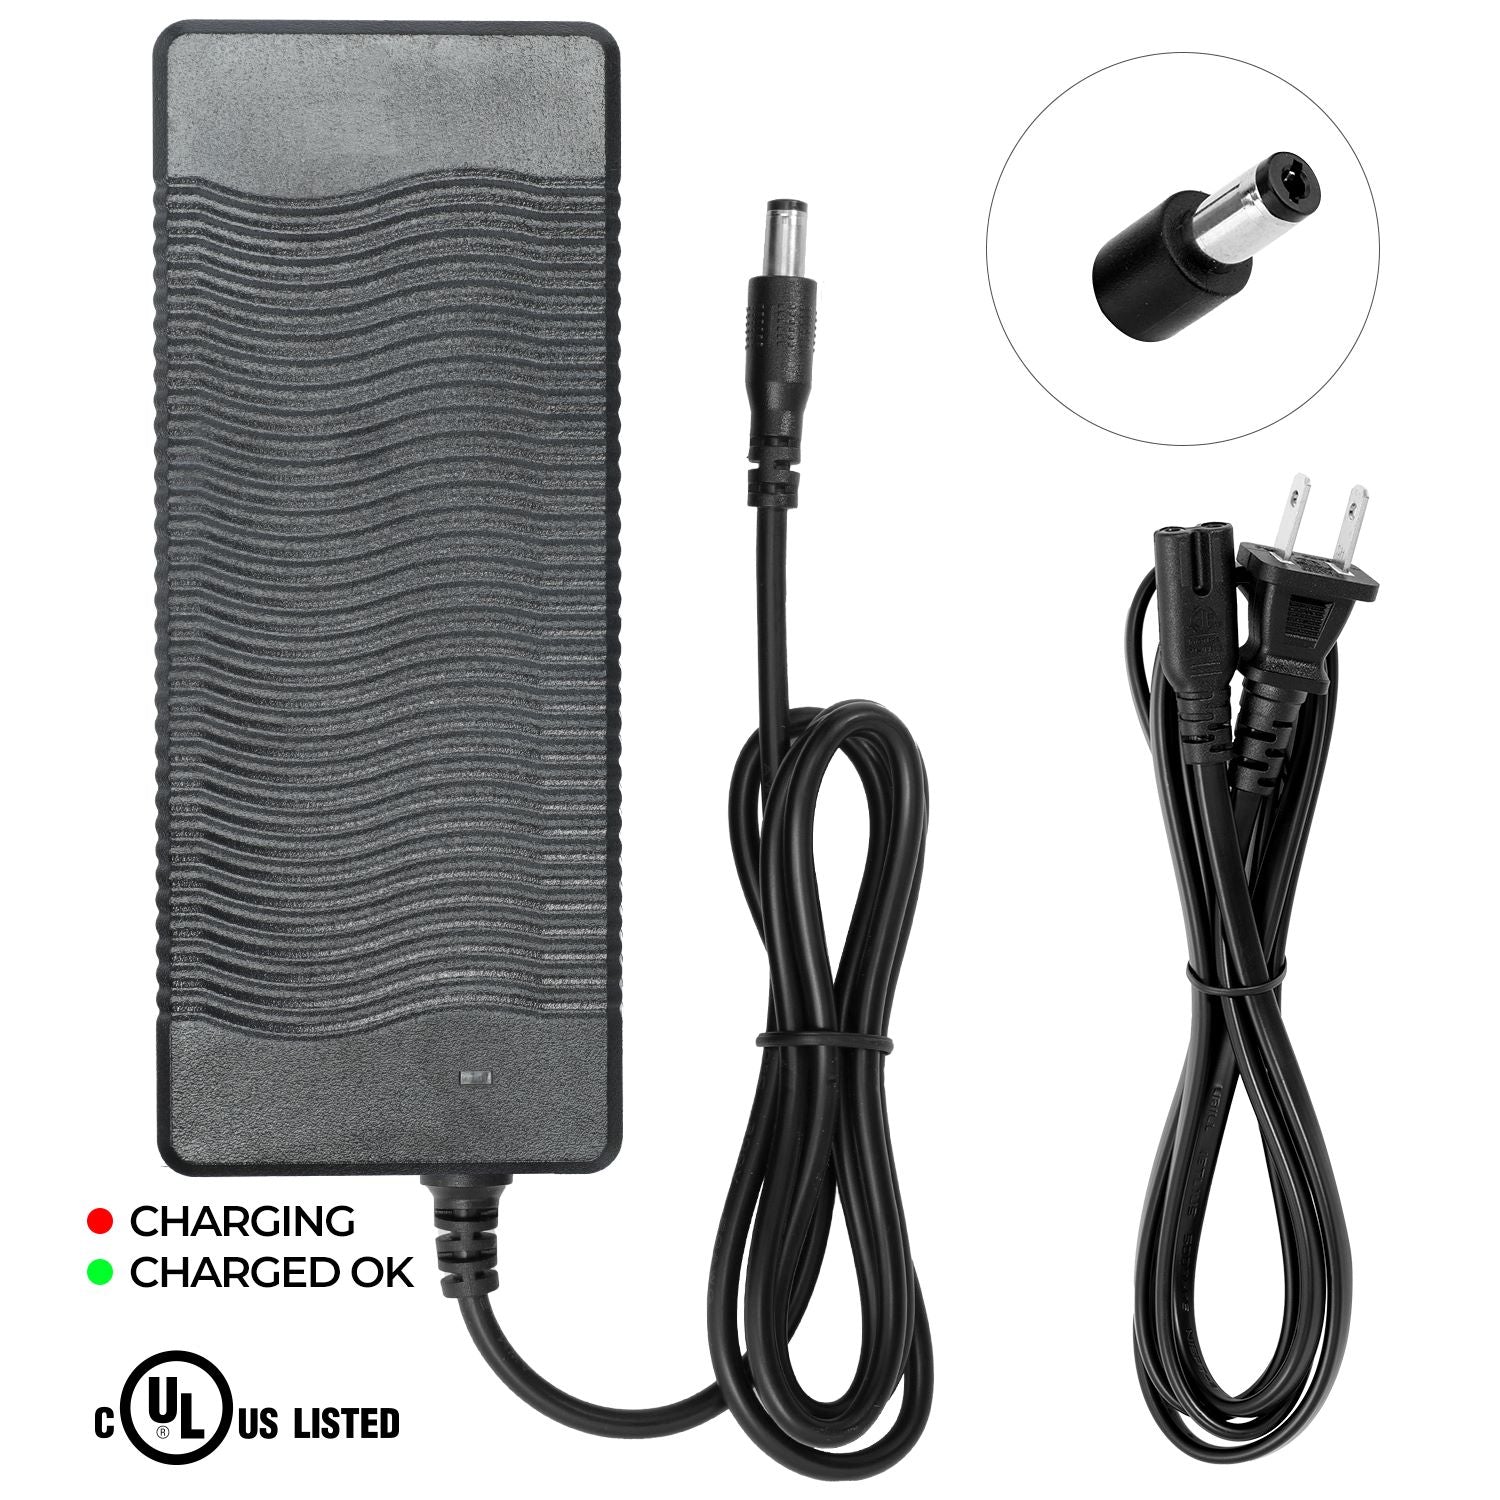 Charger for SONDORS Electric Bike